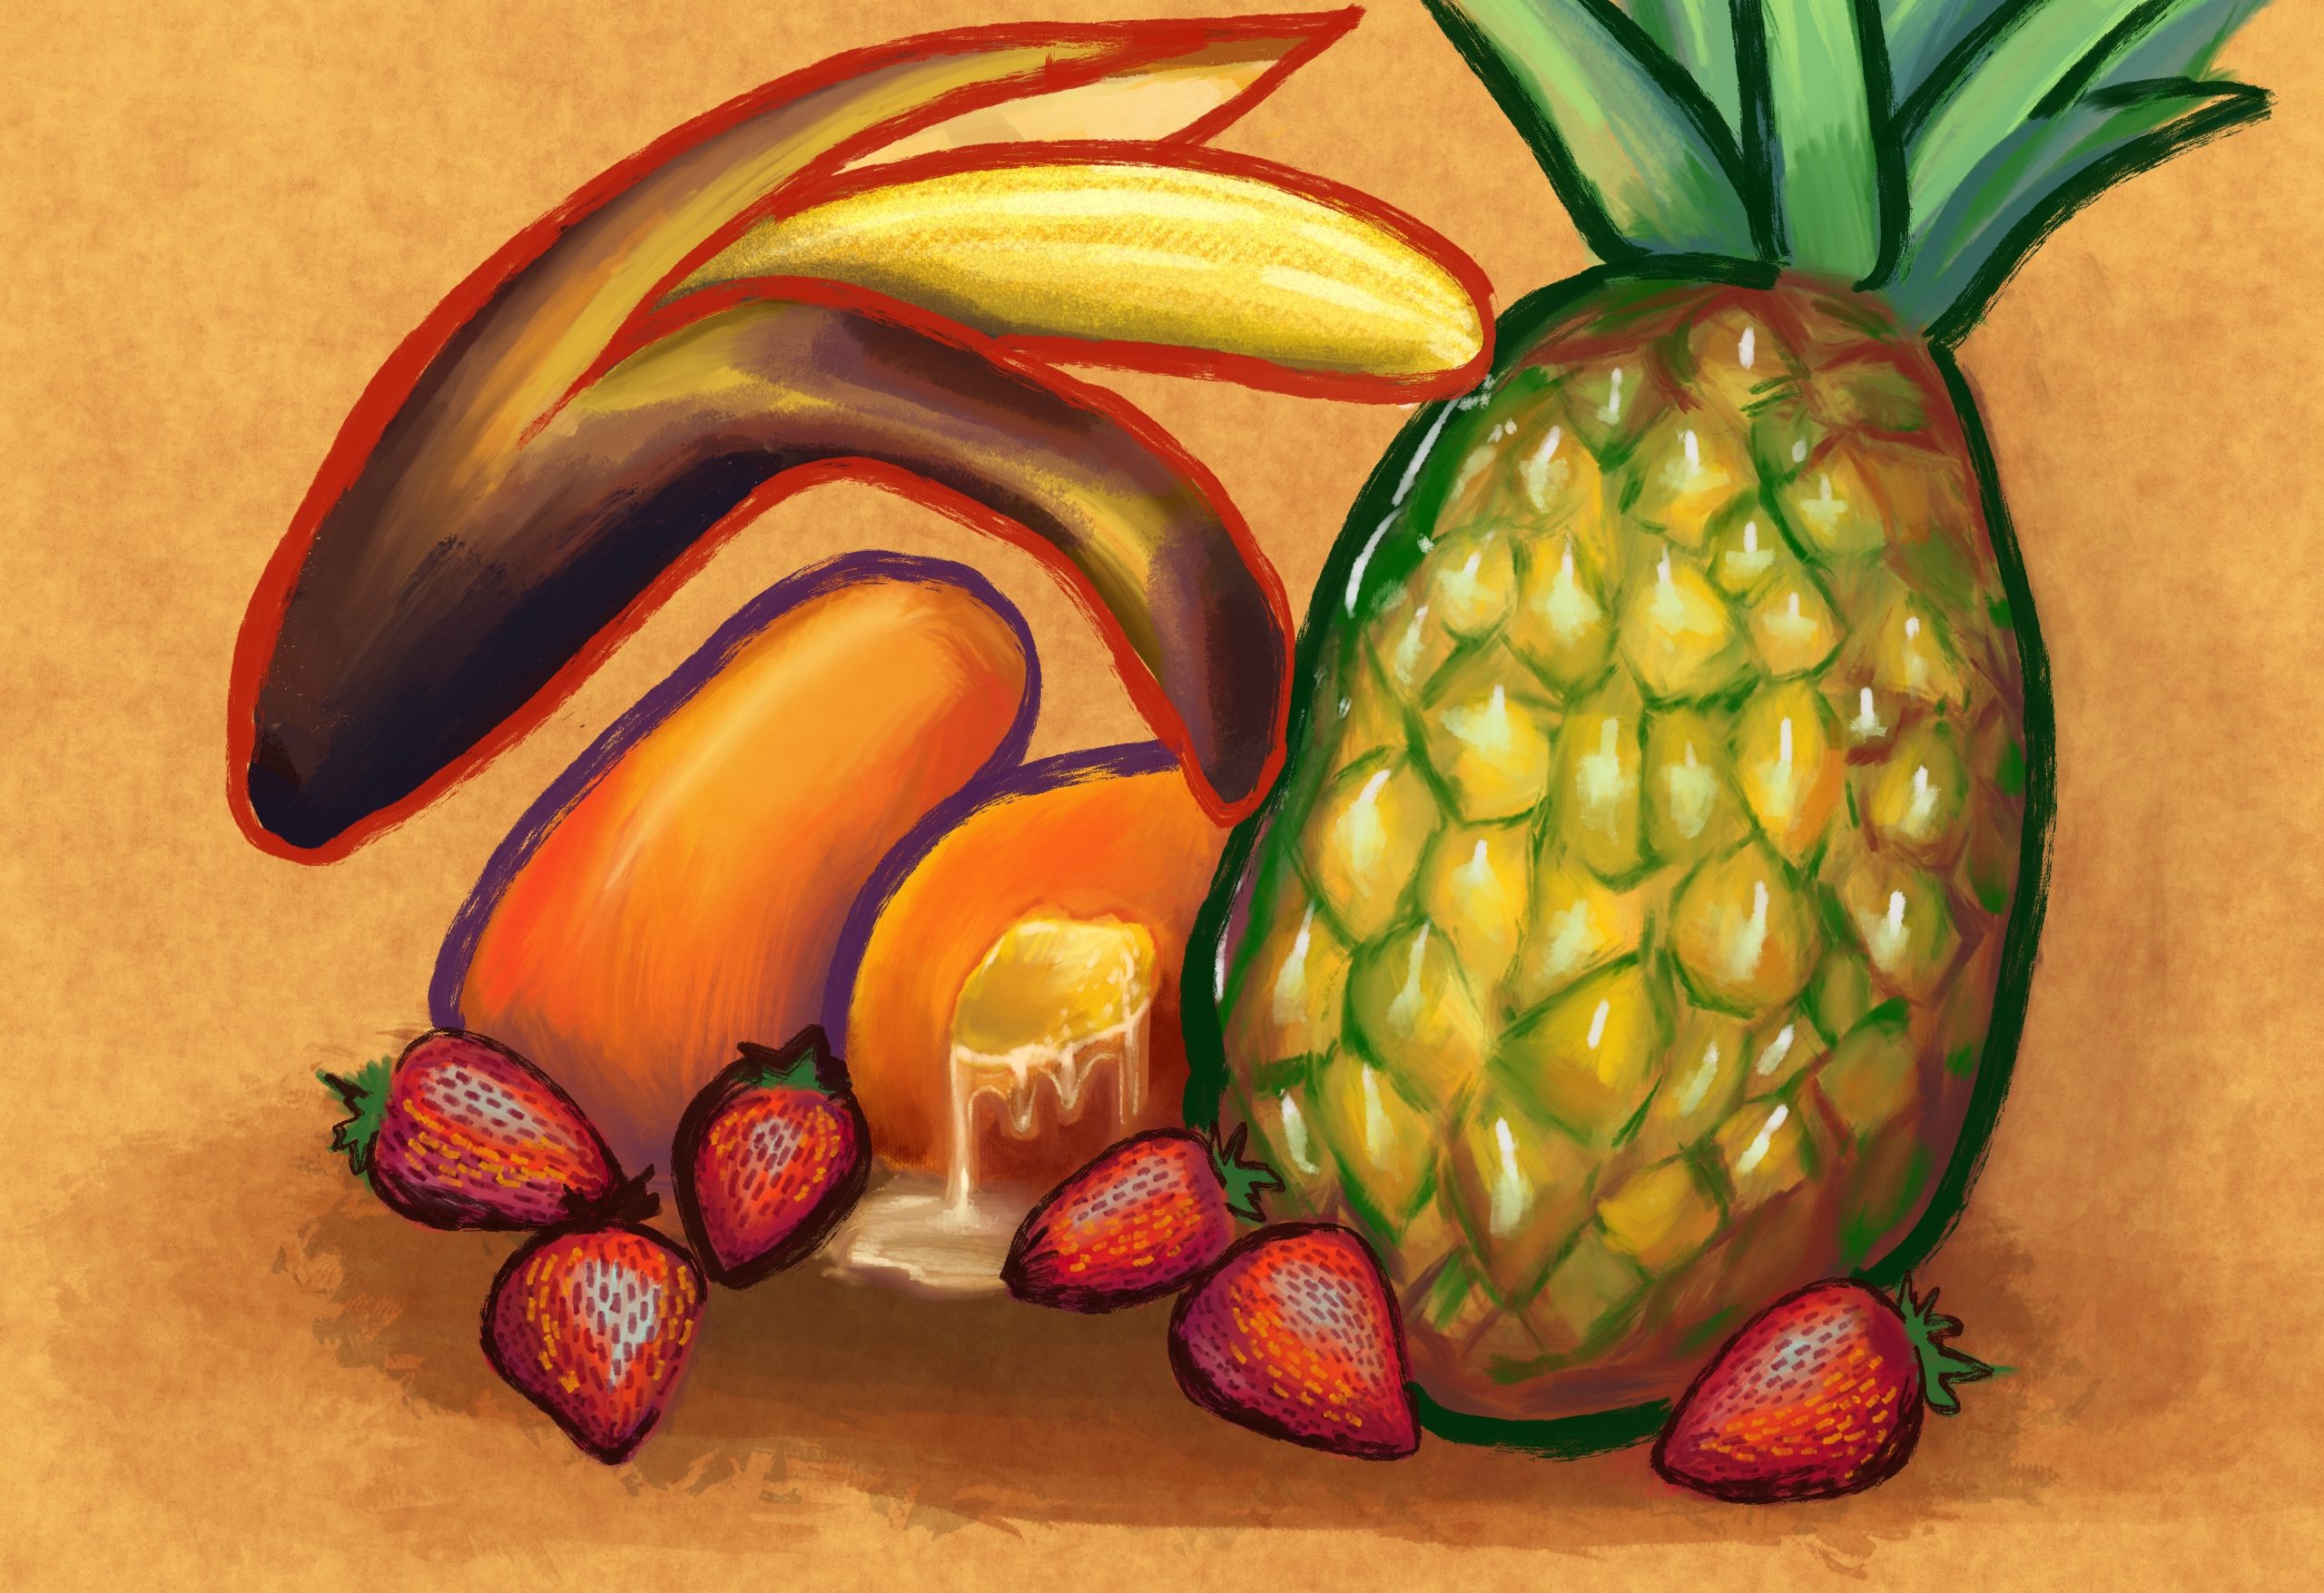 Image: An arrangement of fruit is presented against a yellowish-orange background, including a half-peeled banana, a pineapple, several strawberries, and a halved mango. Illustration by Julia O'Brien.